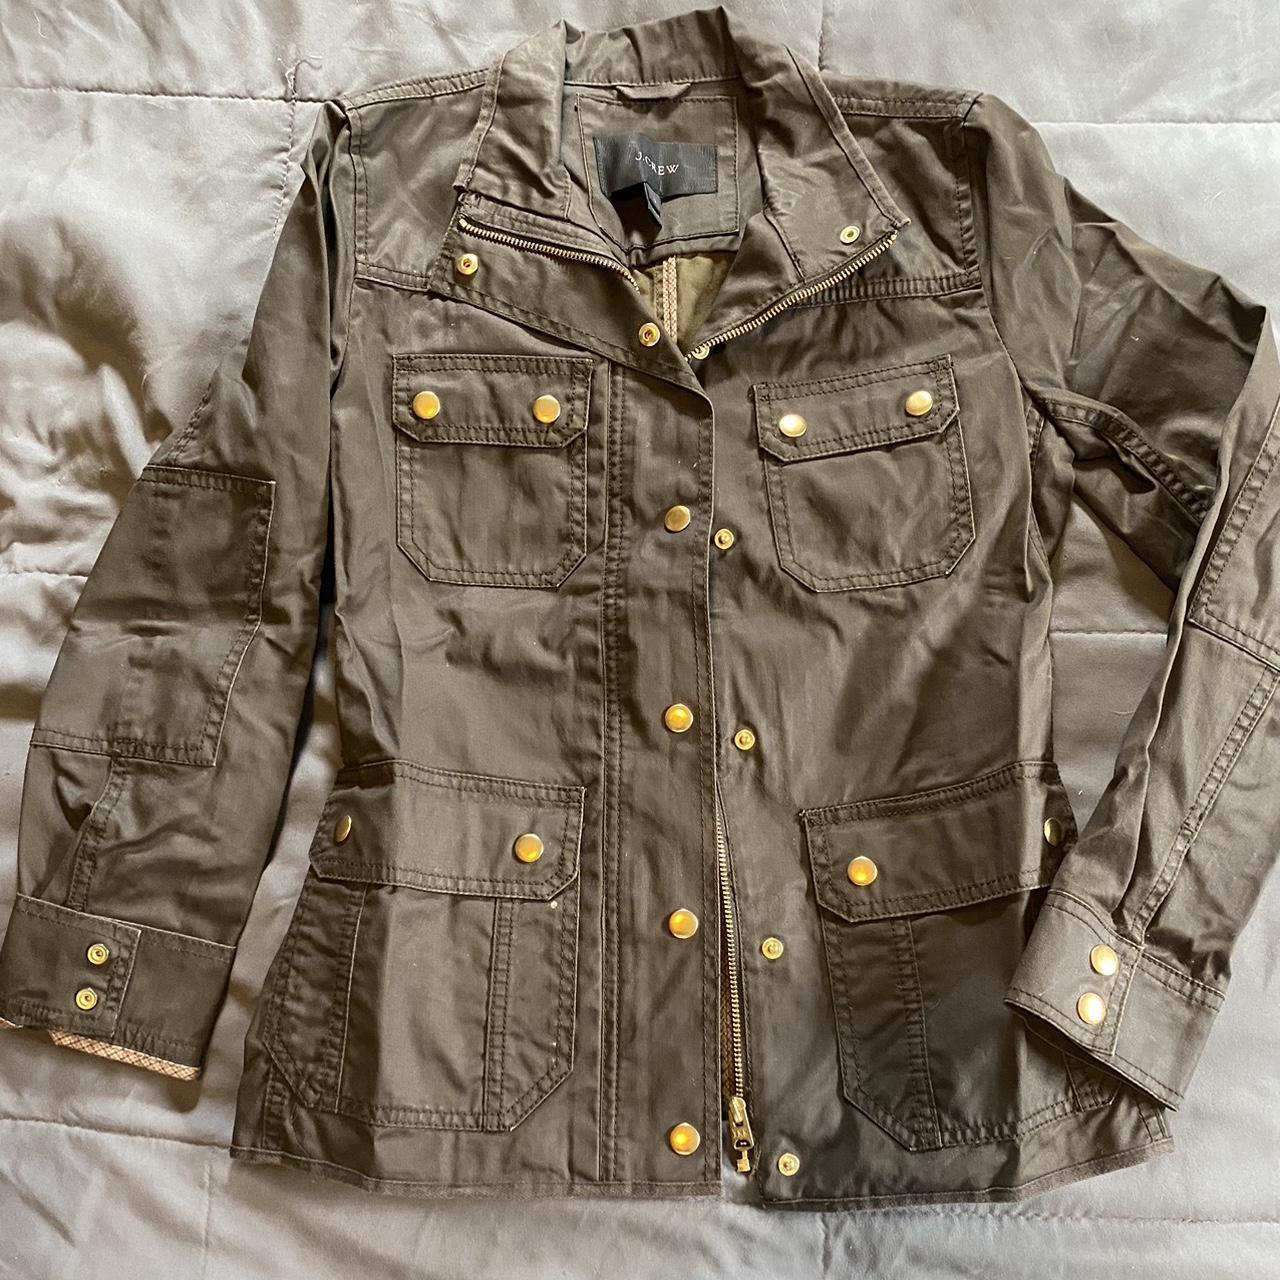 Stunning Military Jacket With Patches 